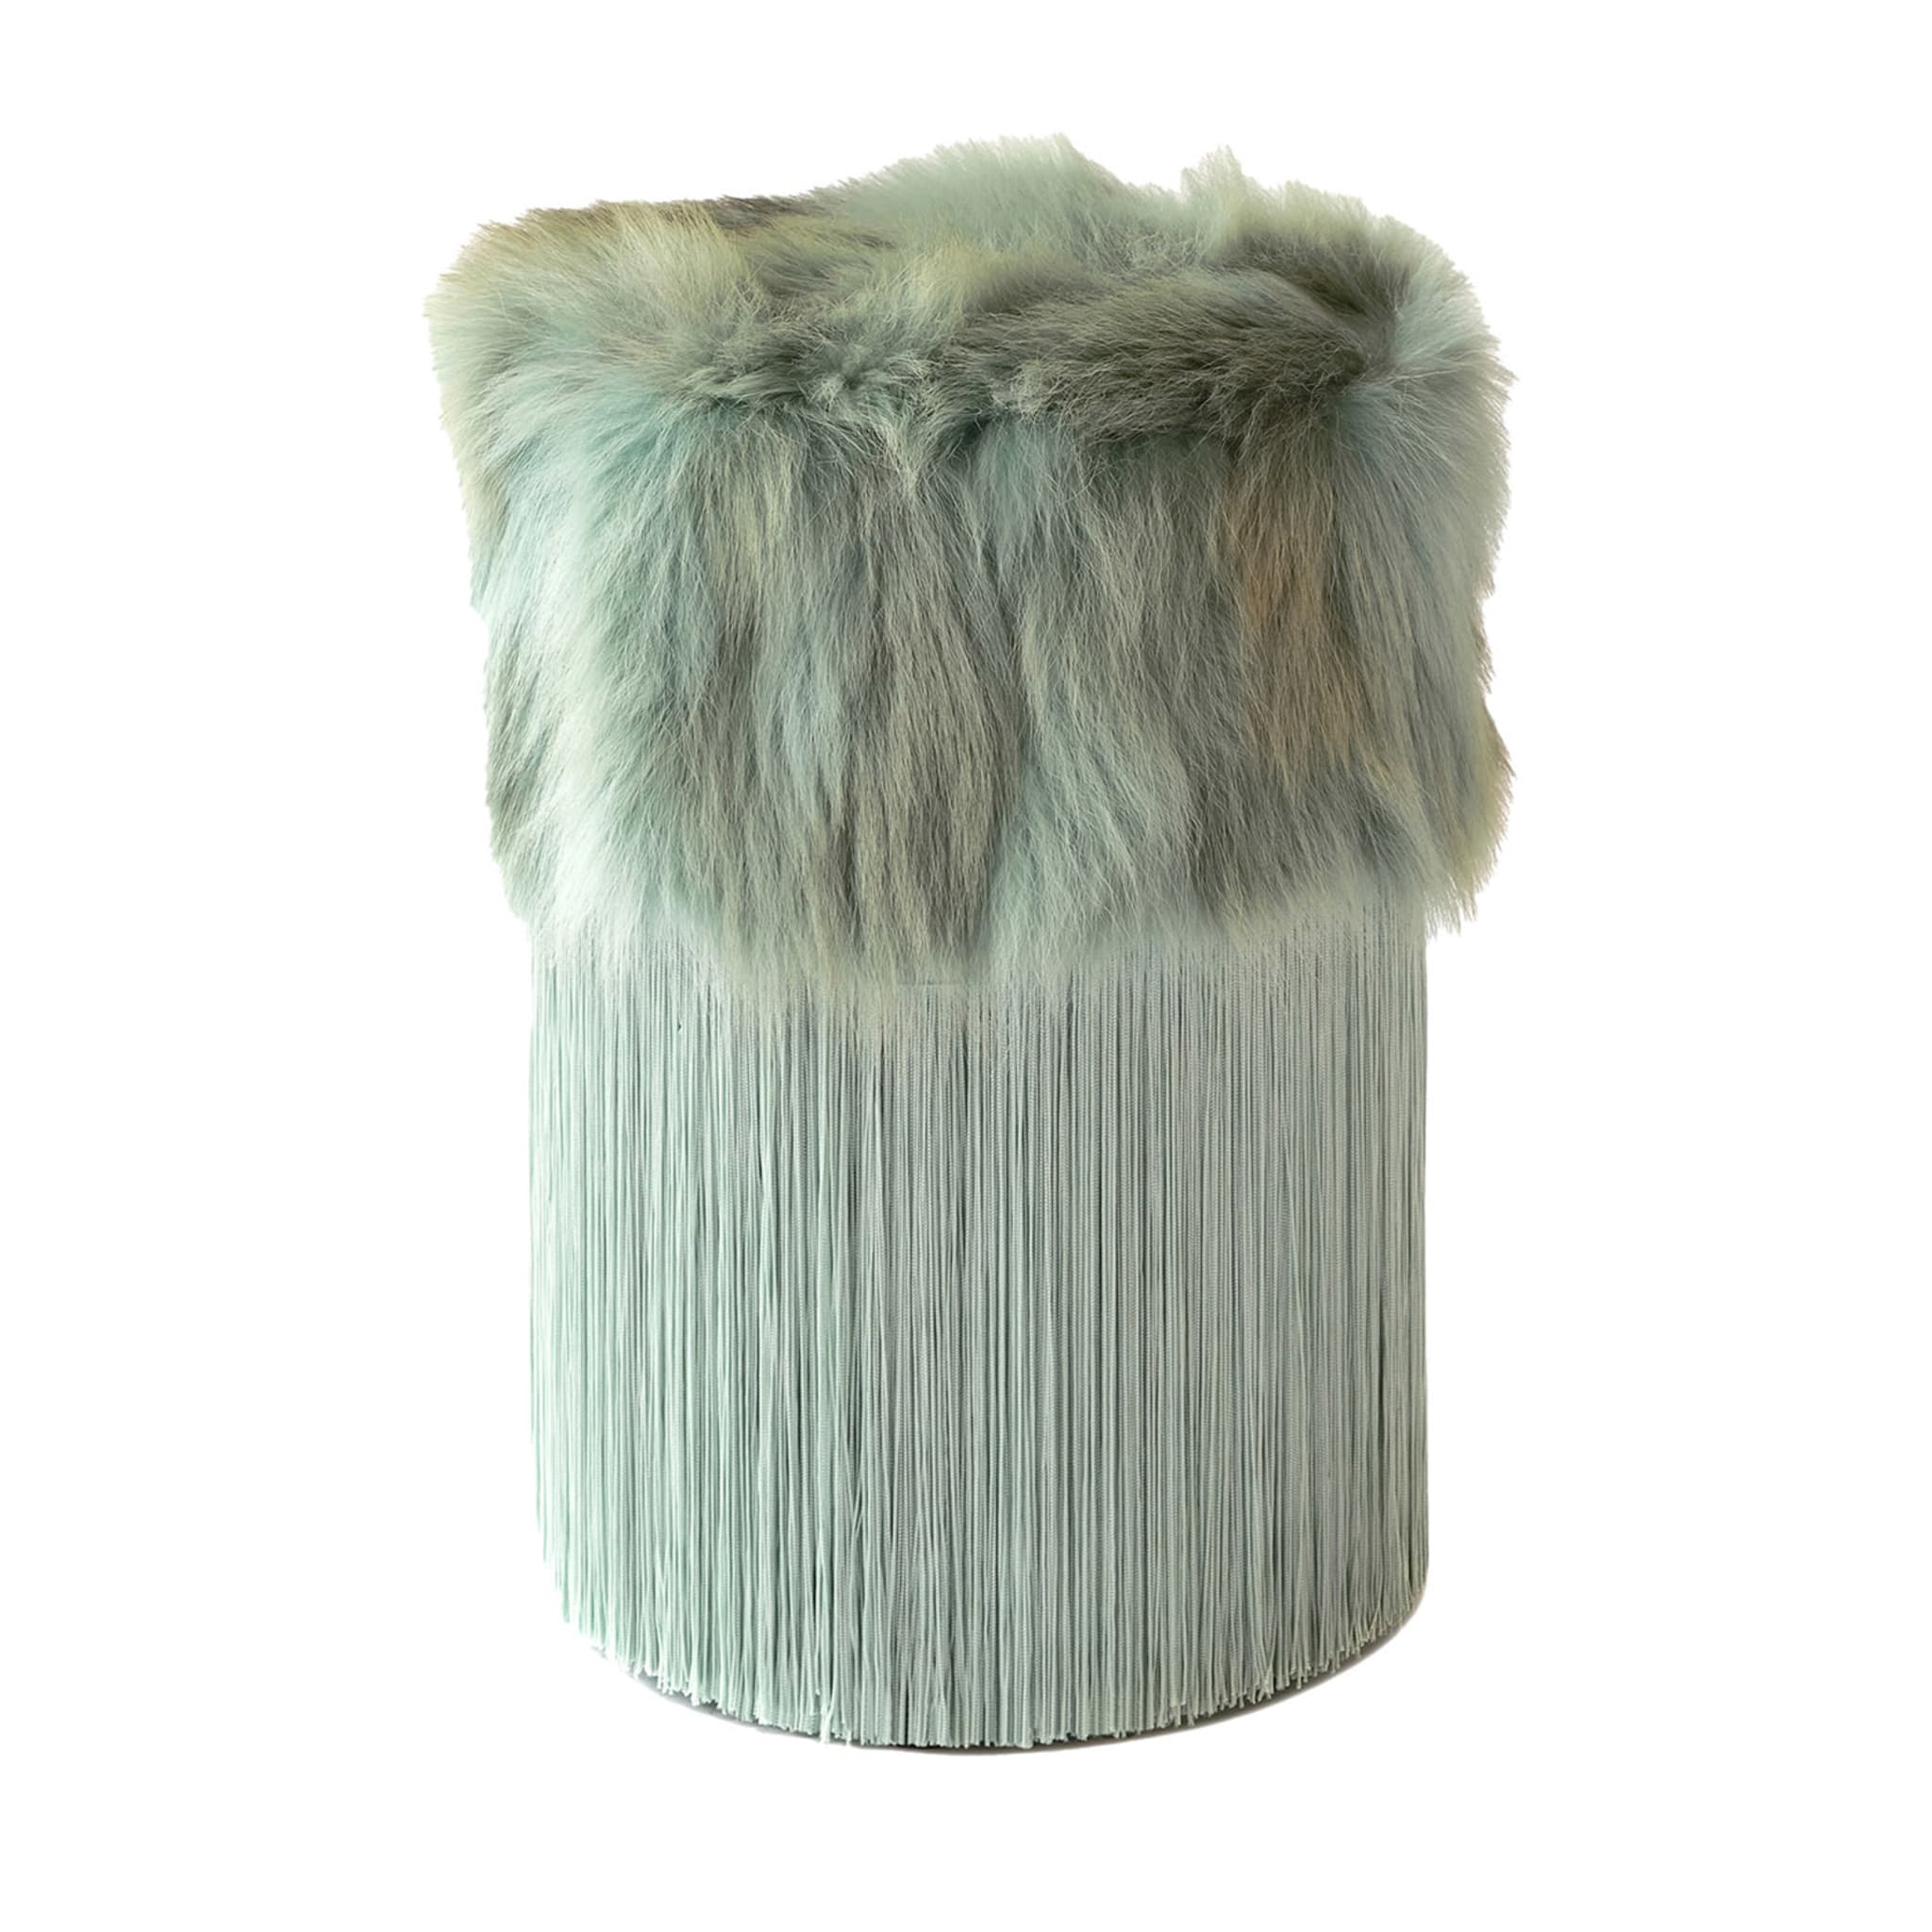 Patchwork Teal Tiffany Coyote Fur Pouf by Lorenza Bozzoli - Main view